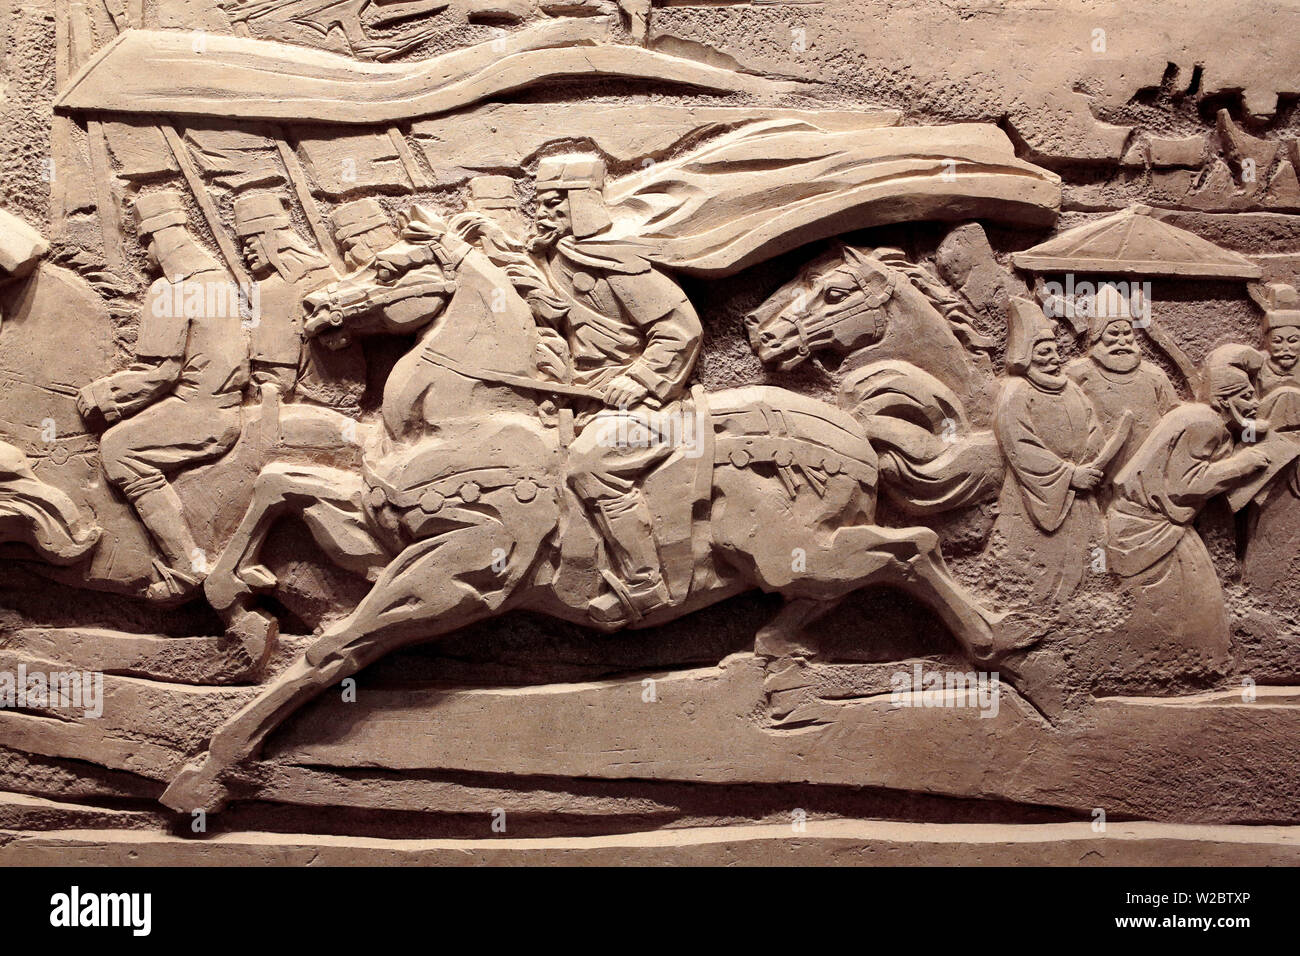 Bas relief, Dunhuang city museum, Dunhuang, Gansu province, China Stock Photo